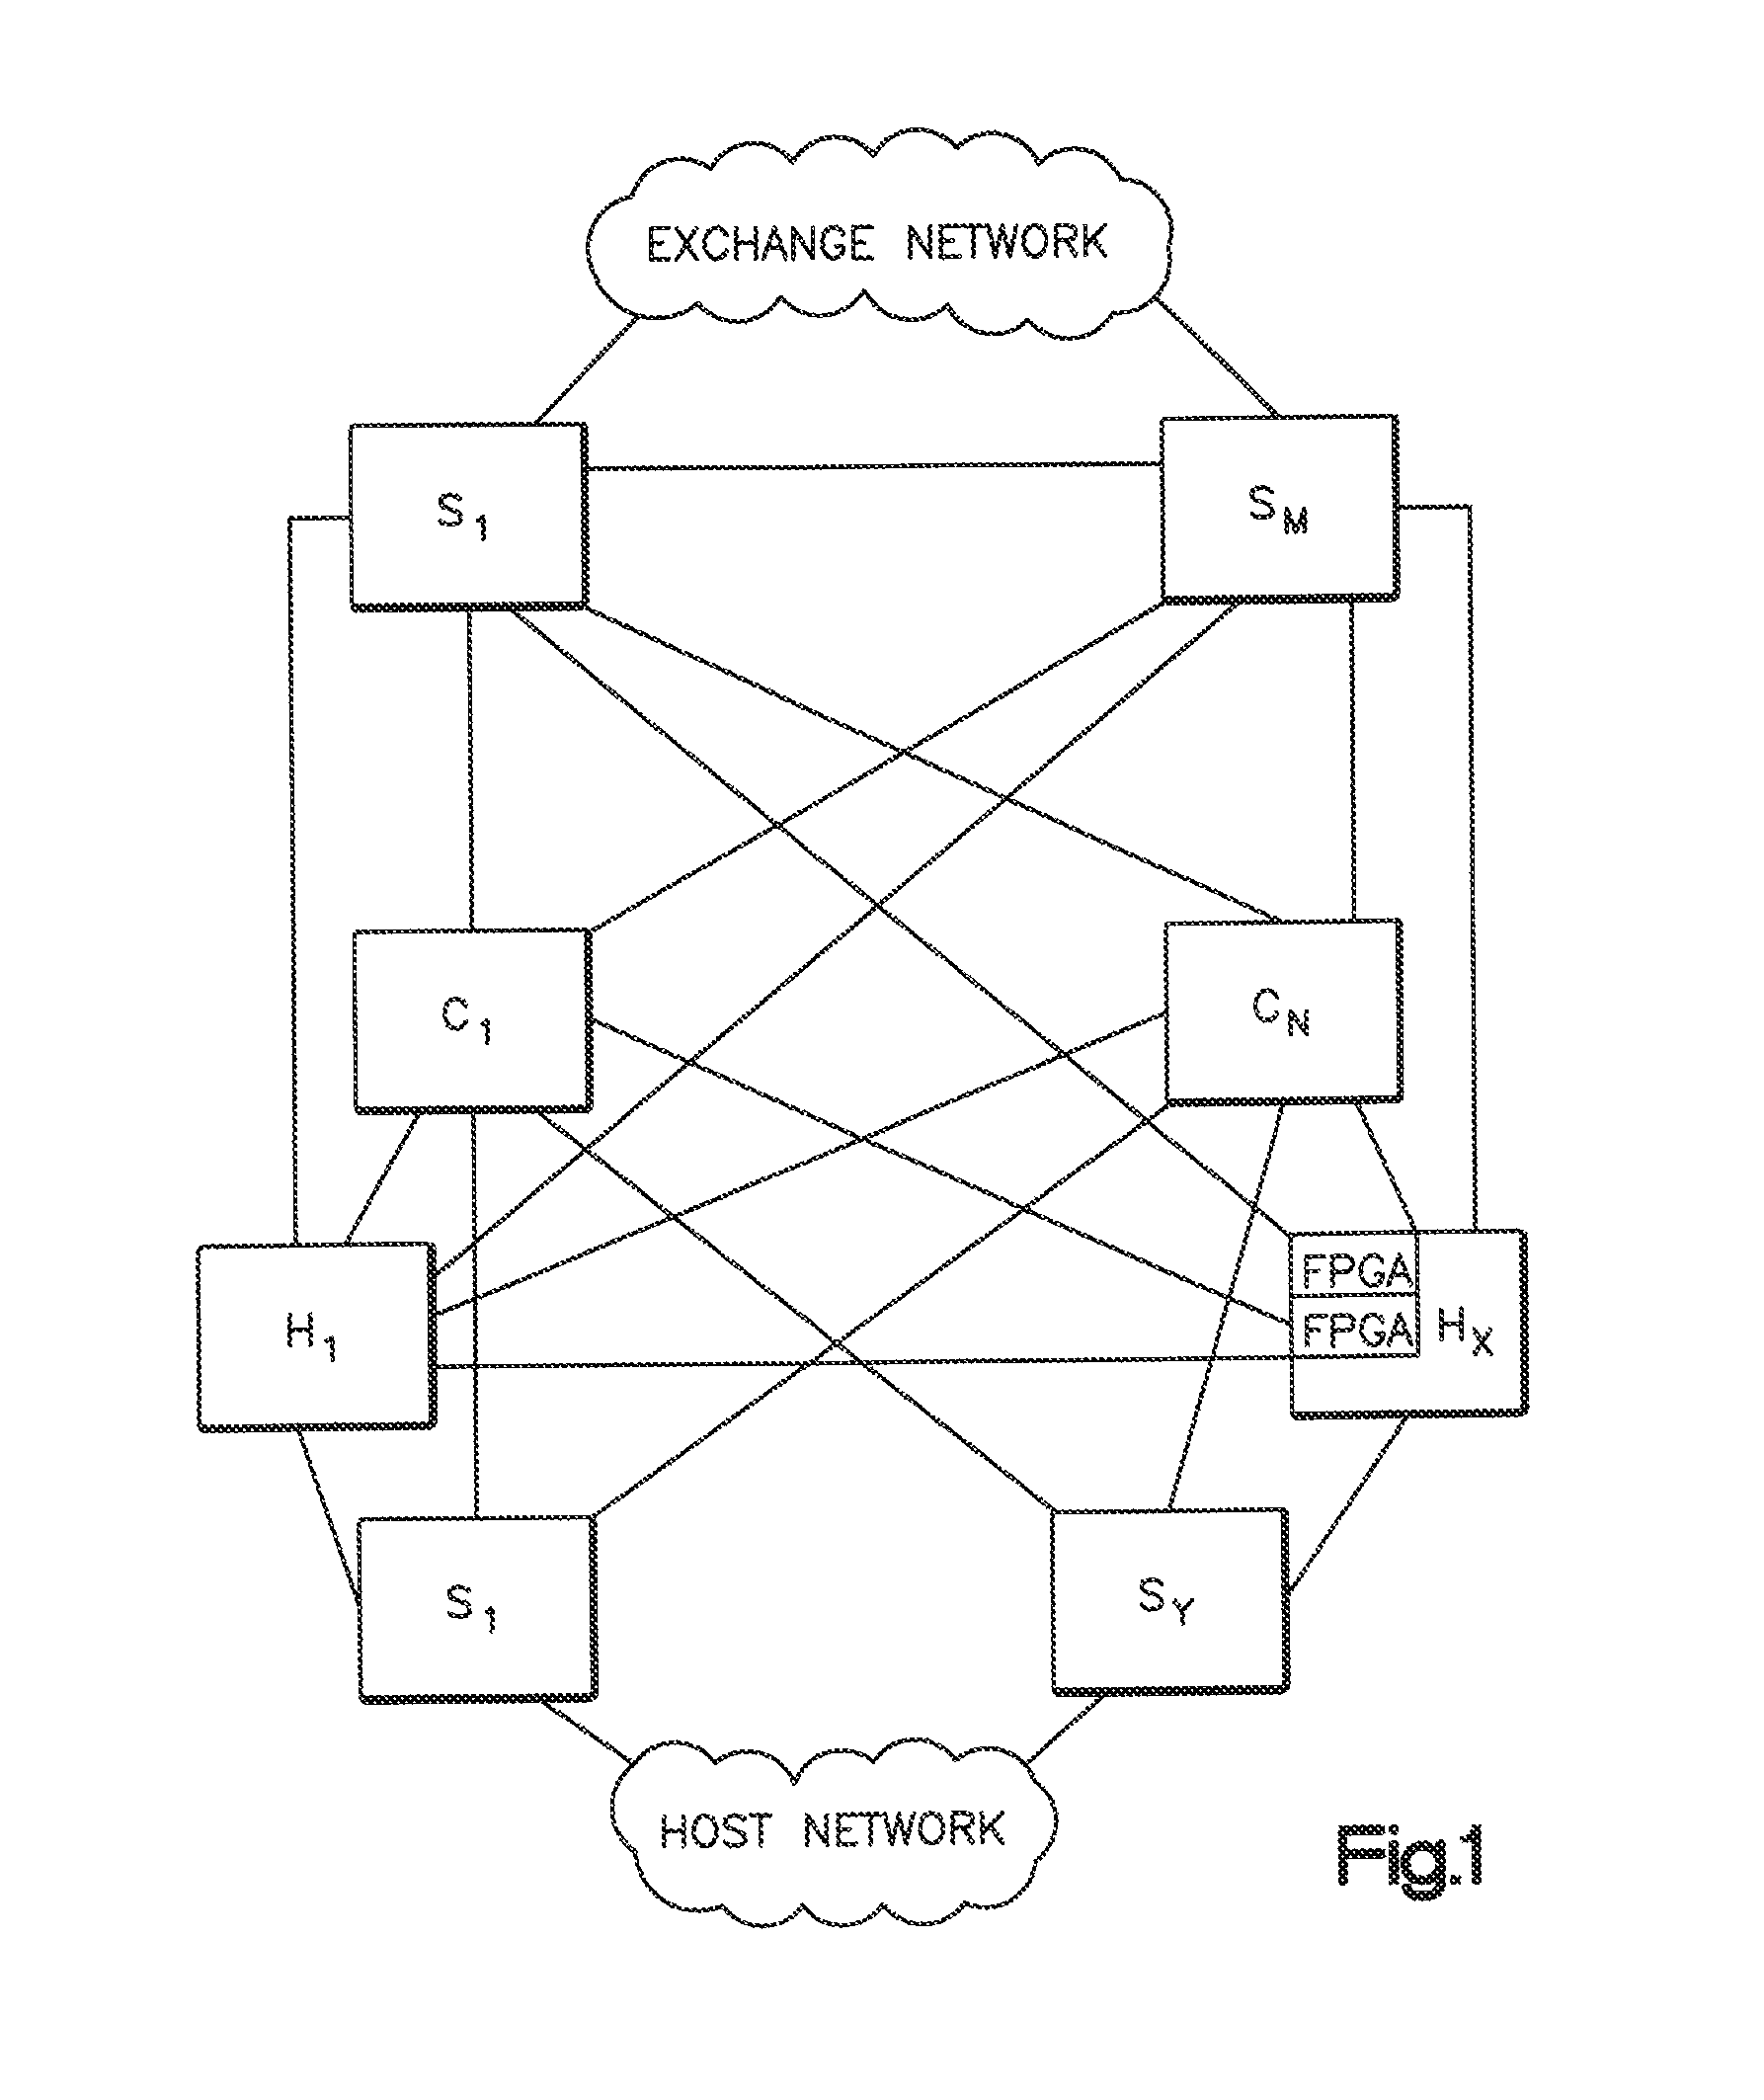 Validating an electronic order transmitted over a network between a client server and an exchange server with a hardware device